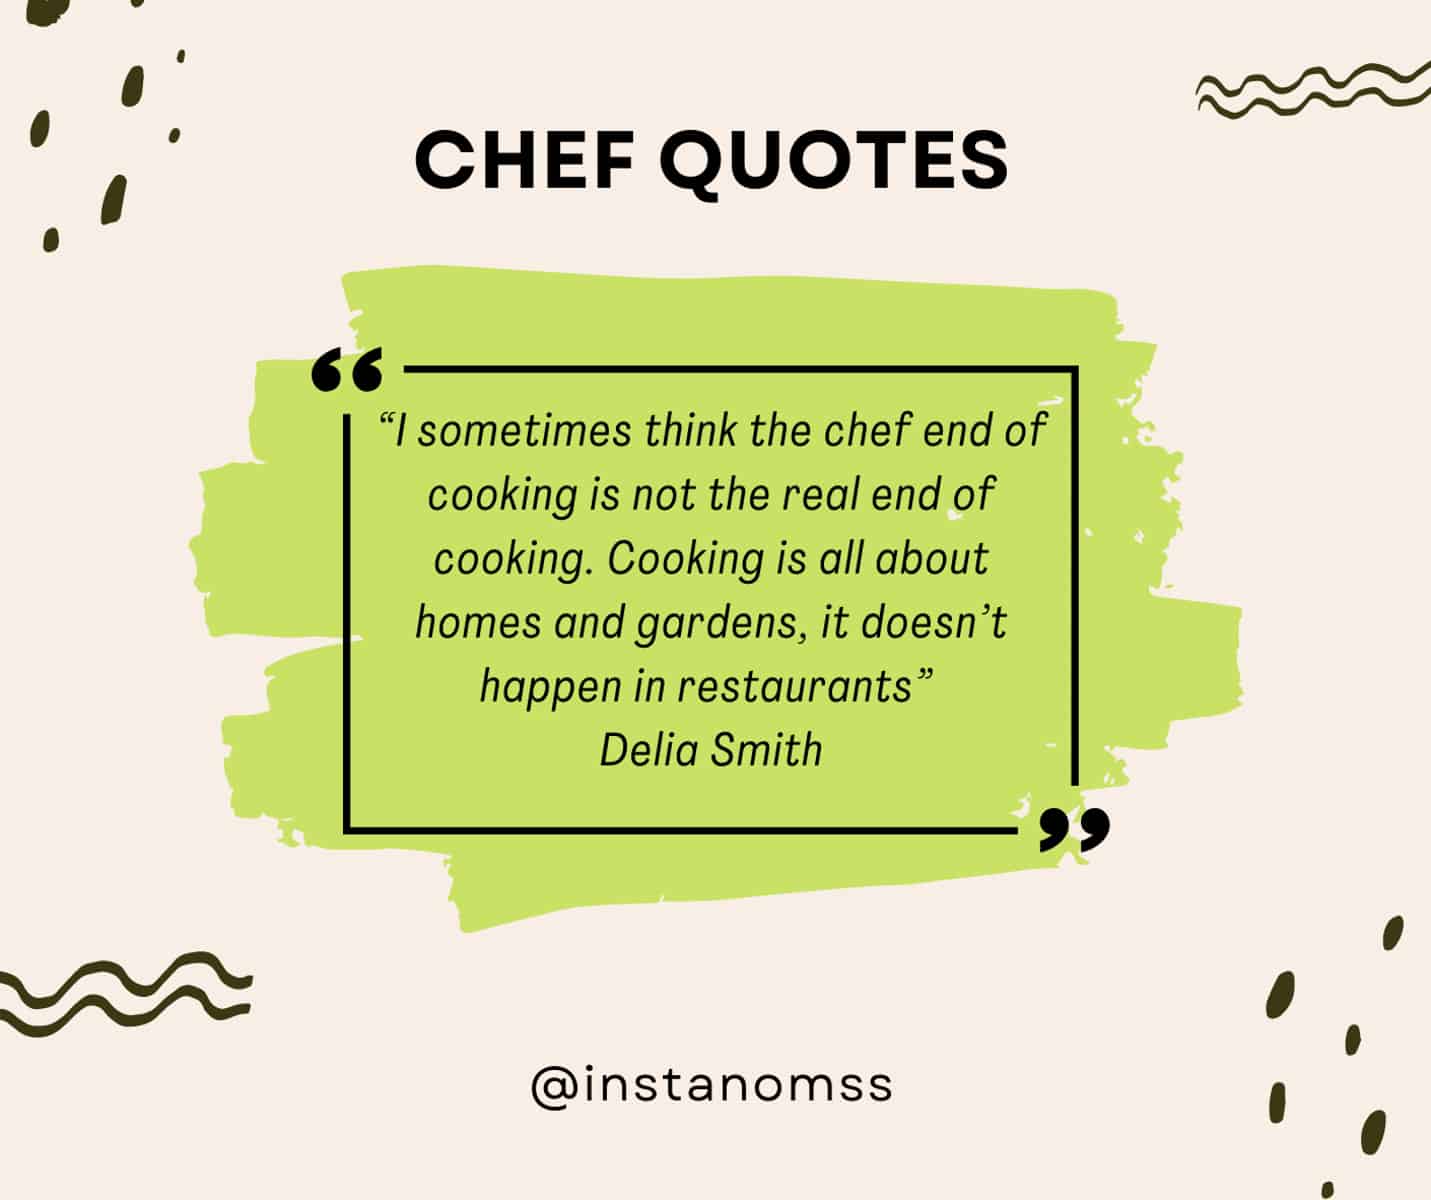 “I sometimes think the chef end of cooking is not the real end of cooking. Cooking is all about homes and gardens, it doesn’t happen in restaurants” Delia Smith